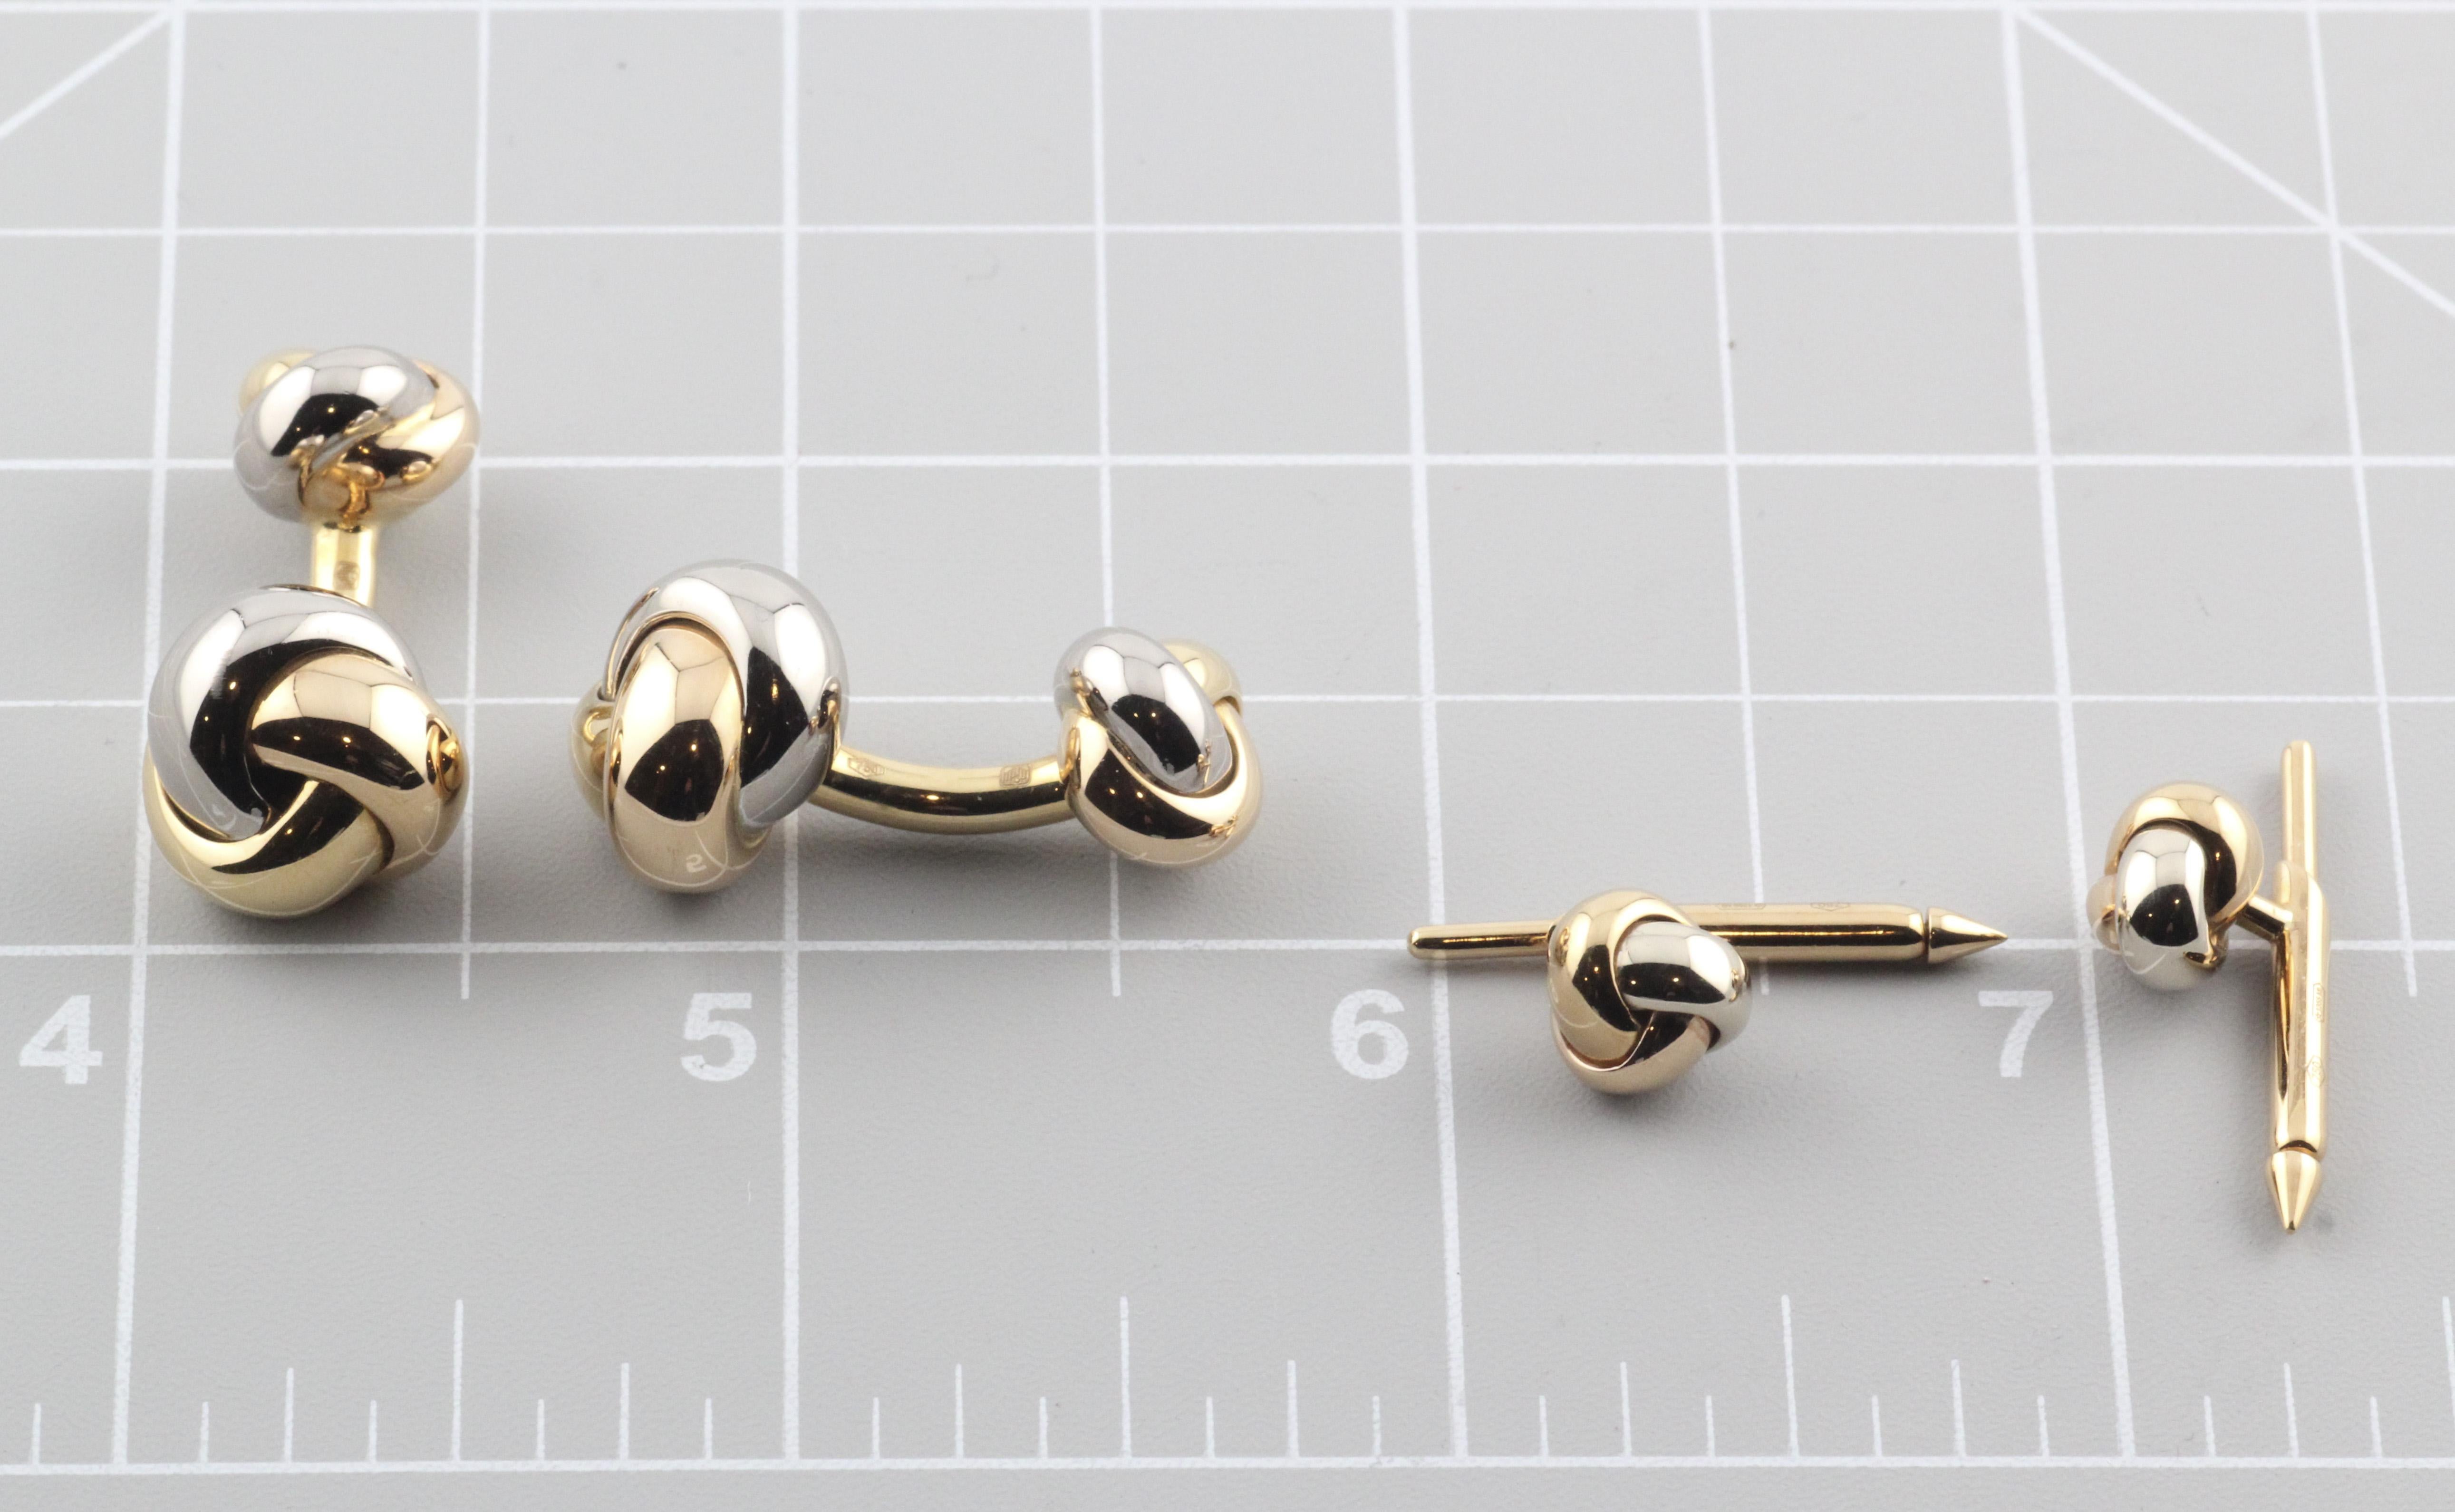 Elevate your formal attire to the pinnacle of elegance and style with the Cartier Trinity Three-Color 18 Karat Gold Knot Cufflink Stud Set. This exquisite ensemble combines Cartier's legendary craftsmanship with the iconic Trinity motif, resulting